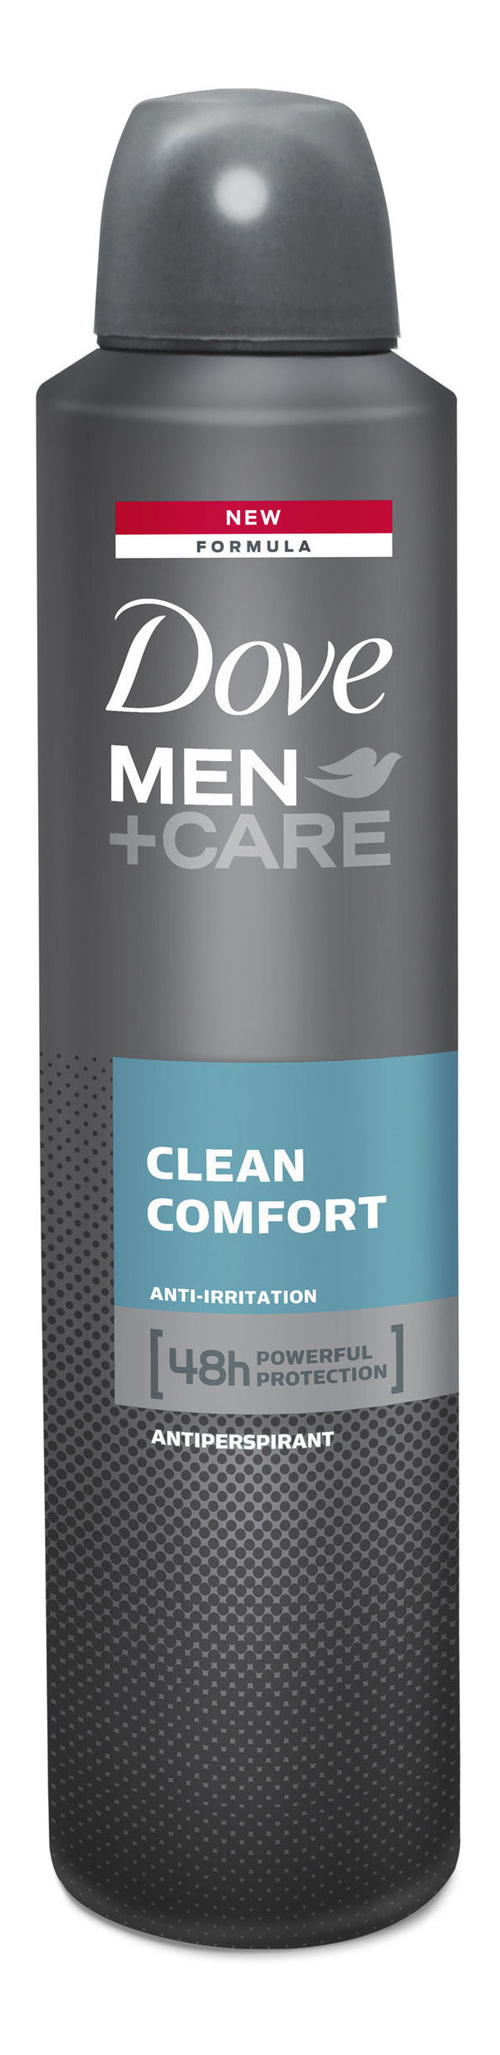 DOVE Men+Care Antiperspirant Aerosol Deodorant Clean Comfort helps fight sweat and odour for up to